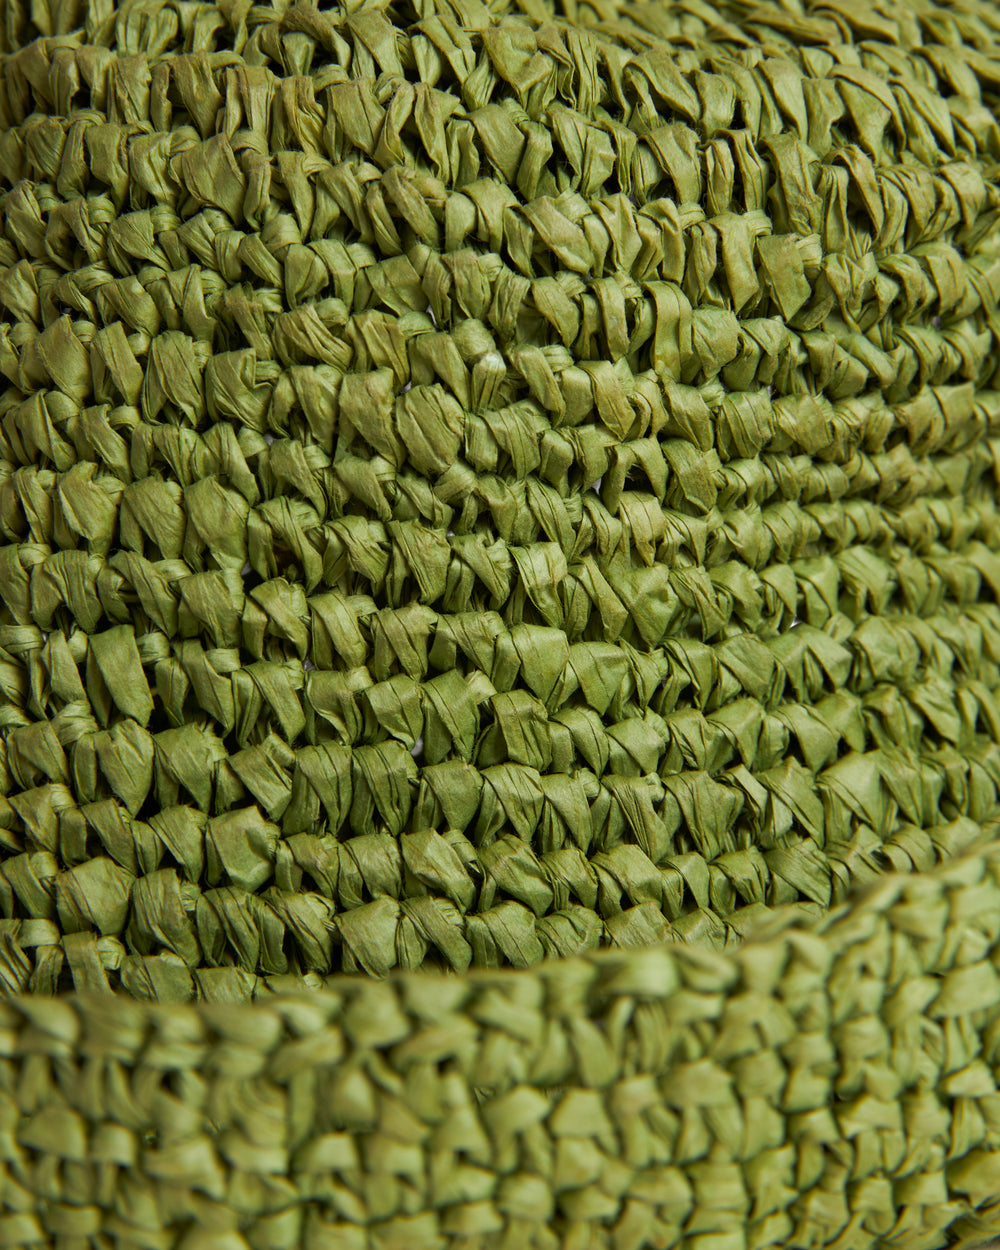 Close-up of a textured green raffia-effect crochet fabric with a detailed, intricate pattern of The Amabile Raffia Hat by Dandy Del Mar.